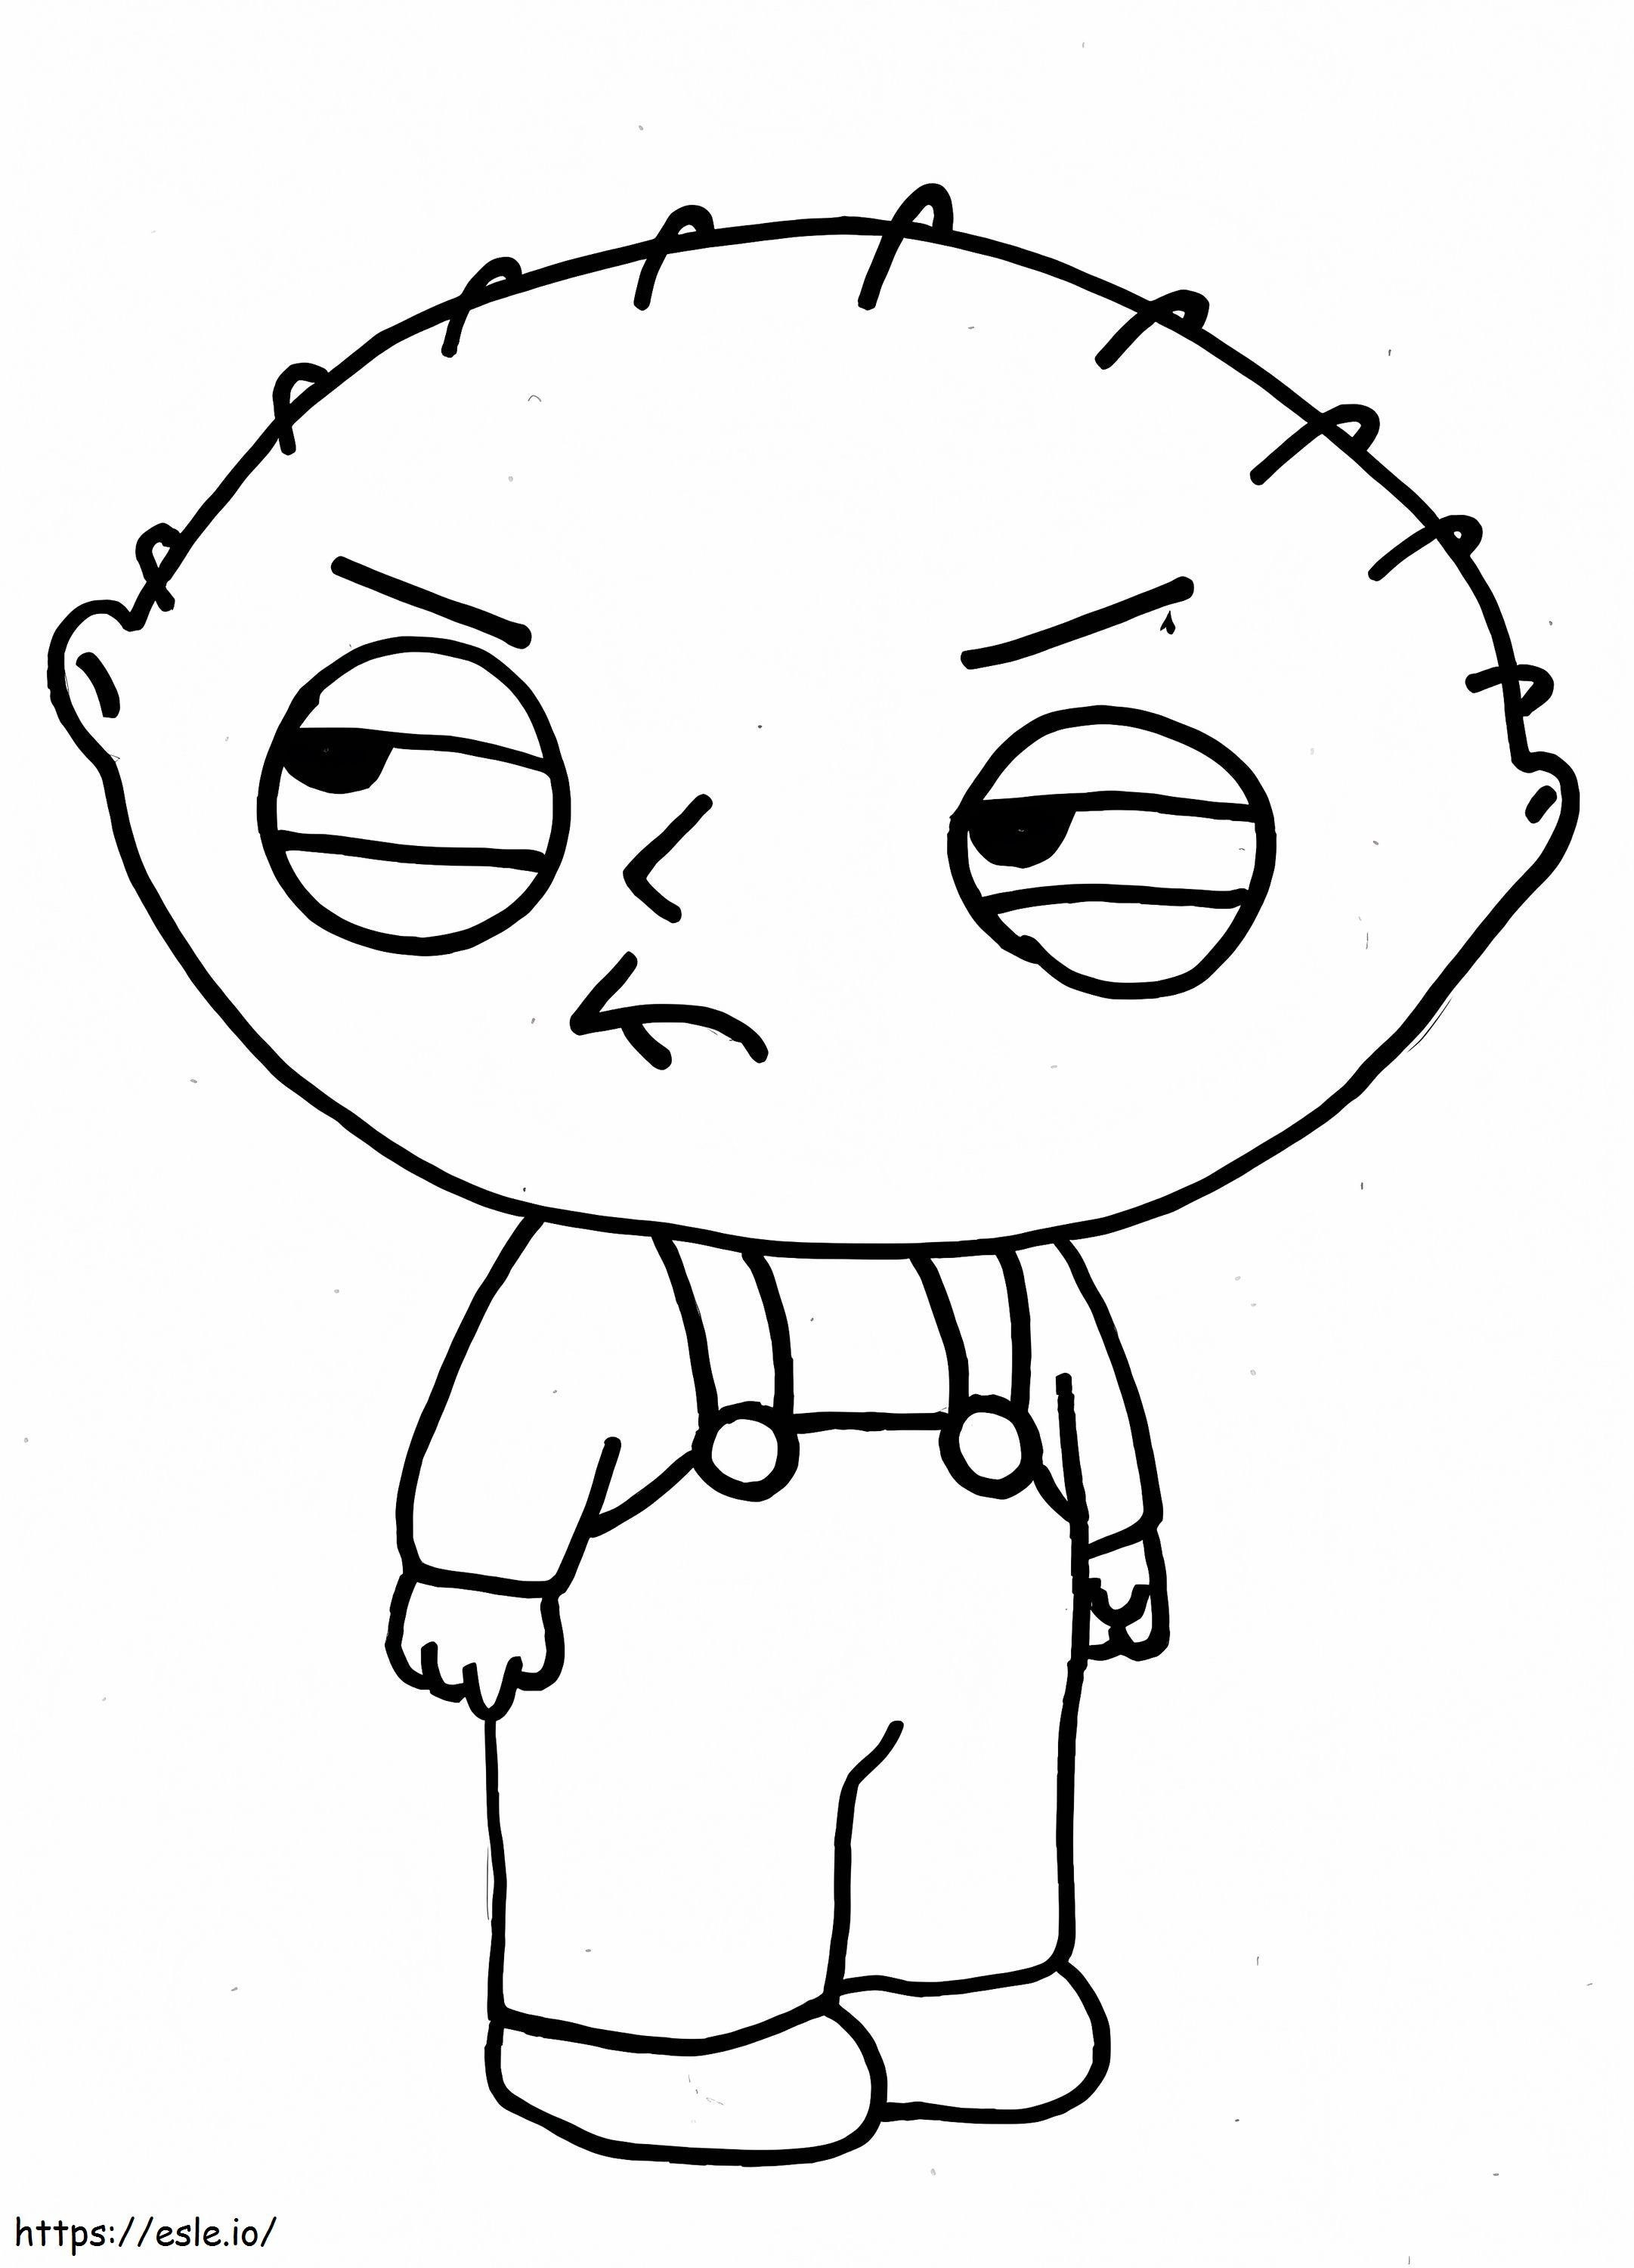 Stewie Griffin Awkward coloring page